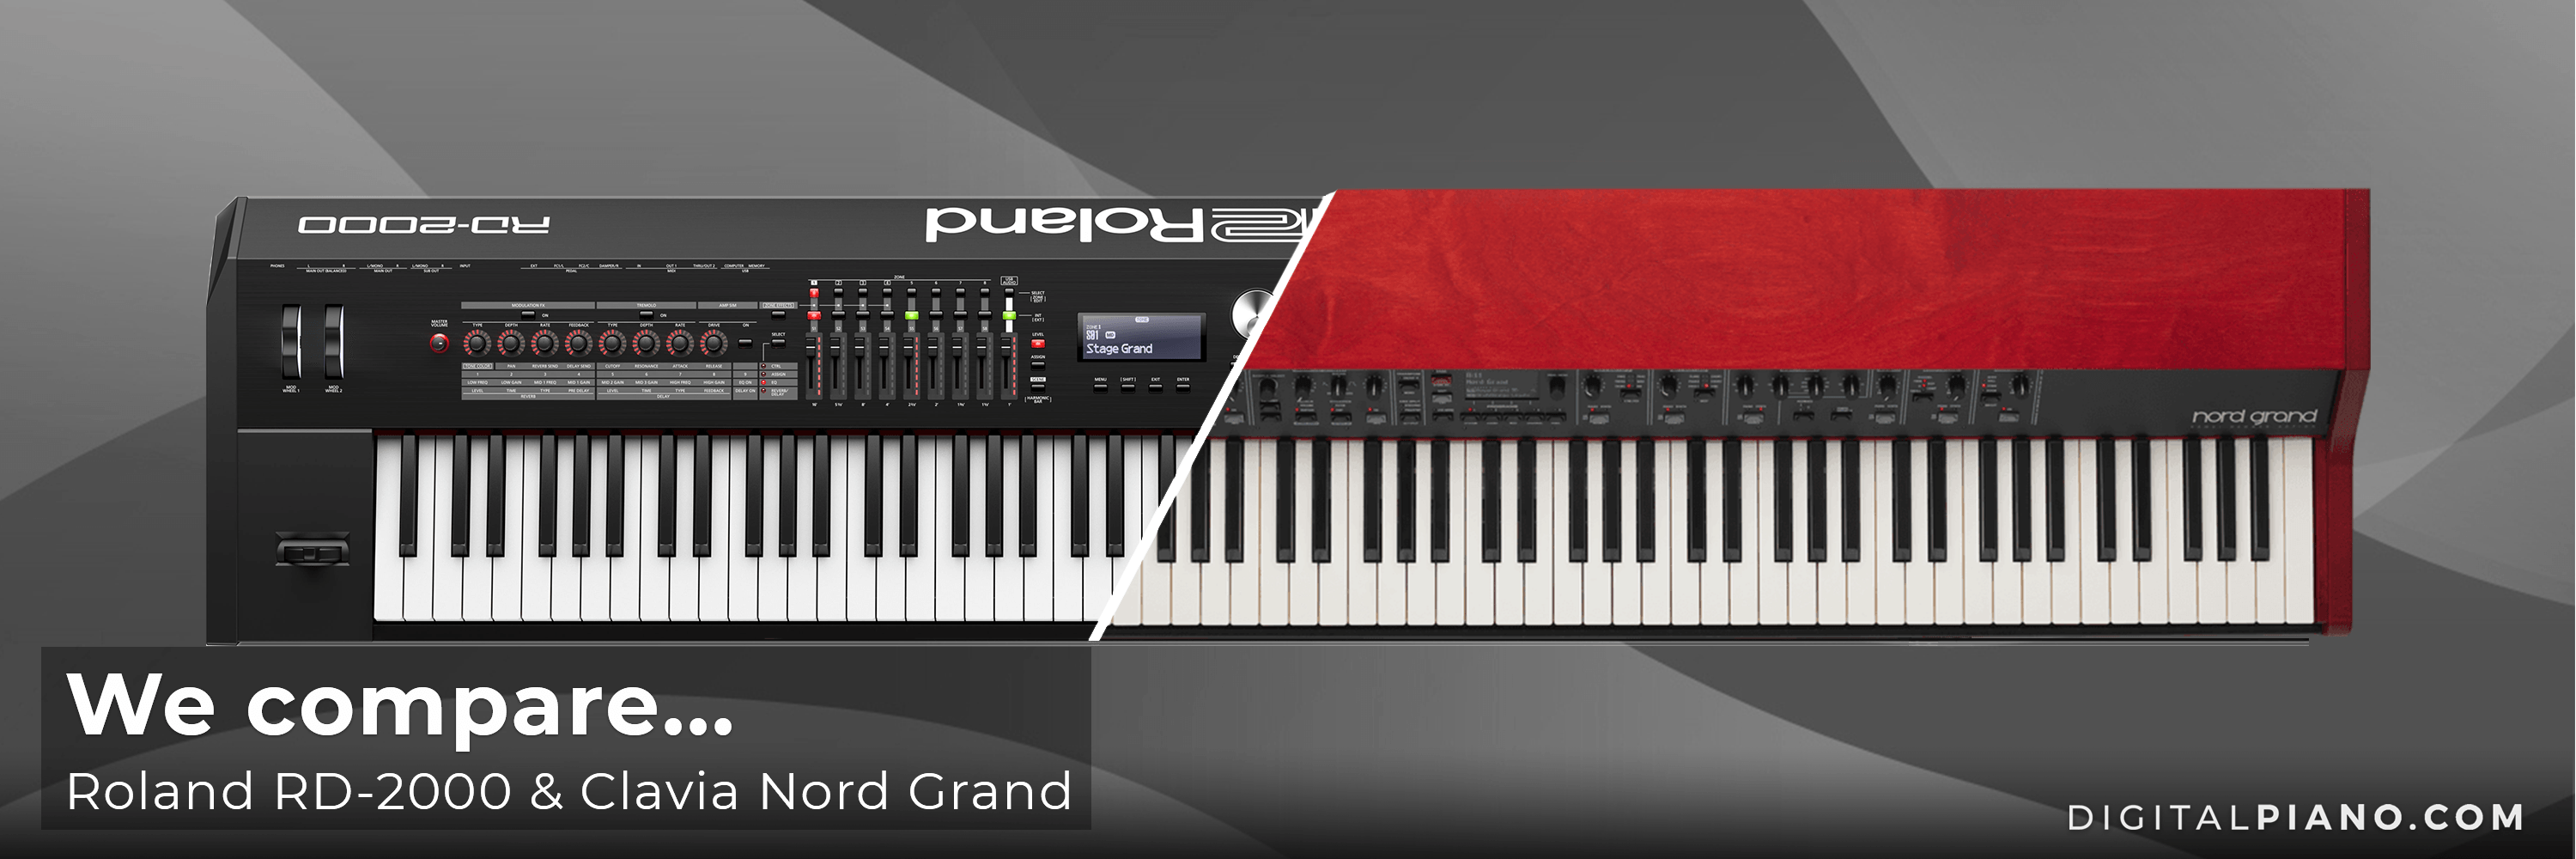 We compare Clavia Nord Grand and Roland RD-2000